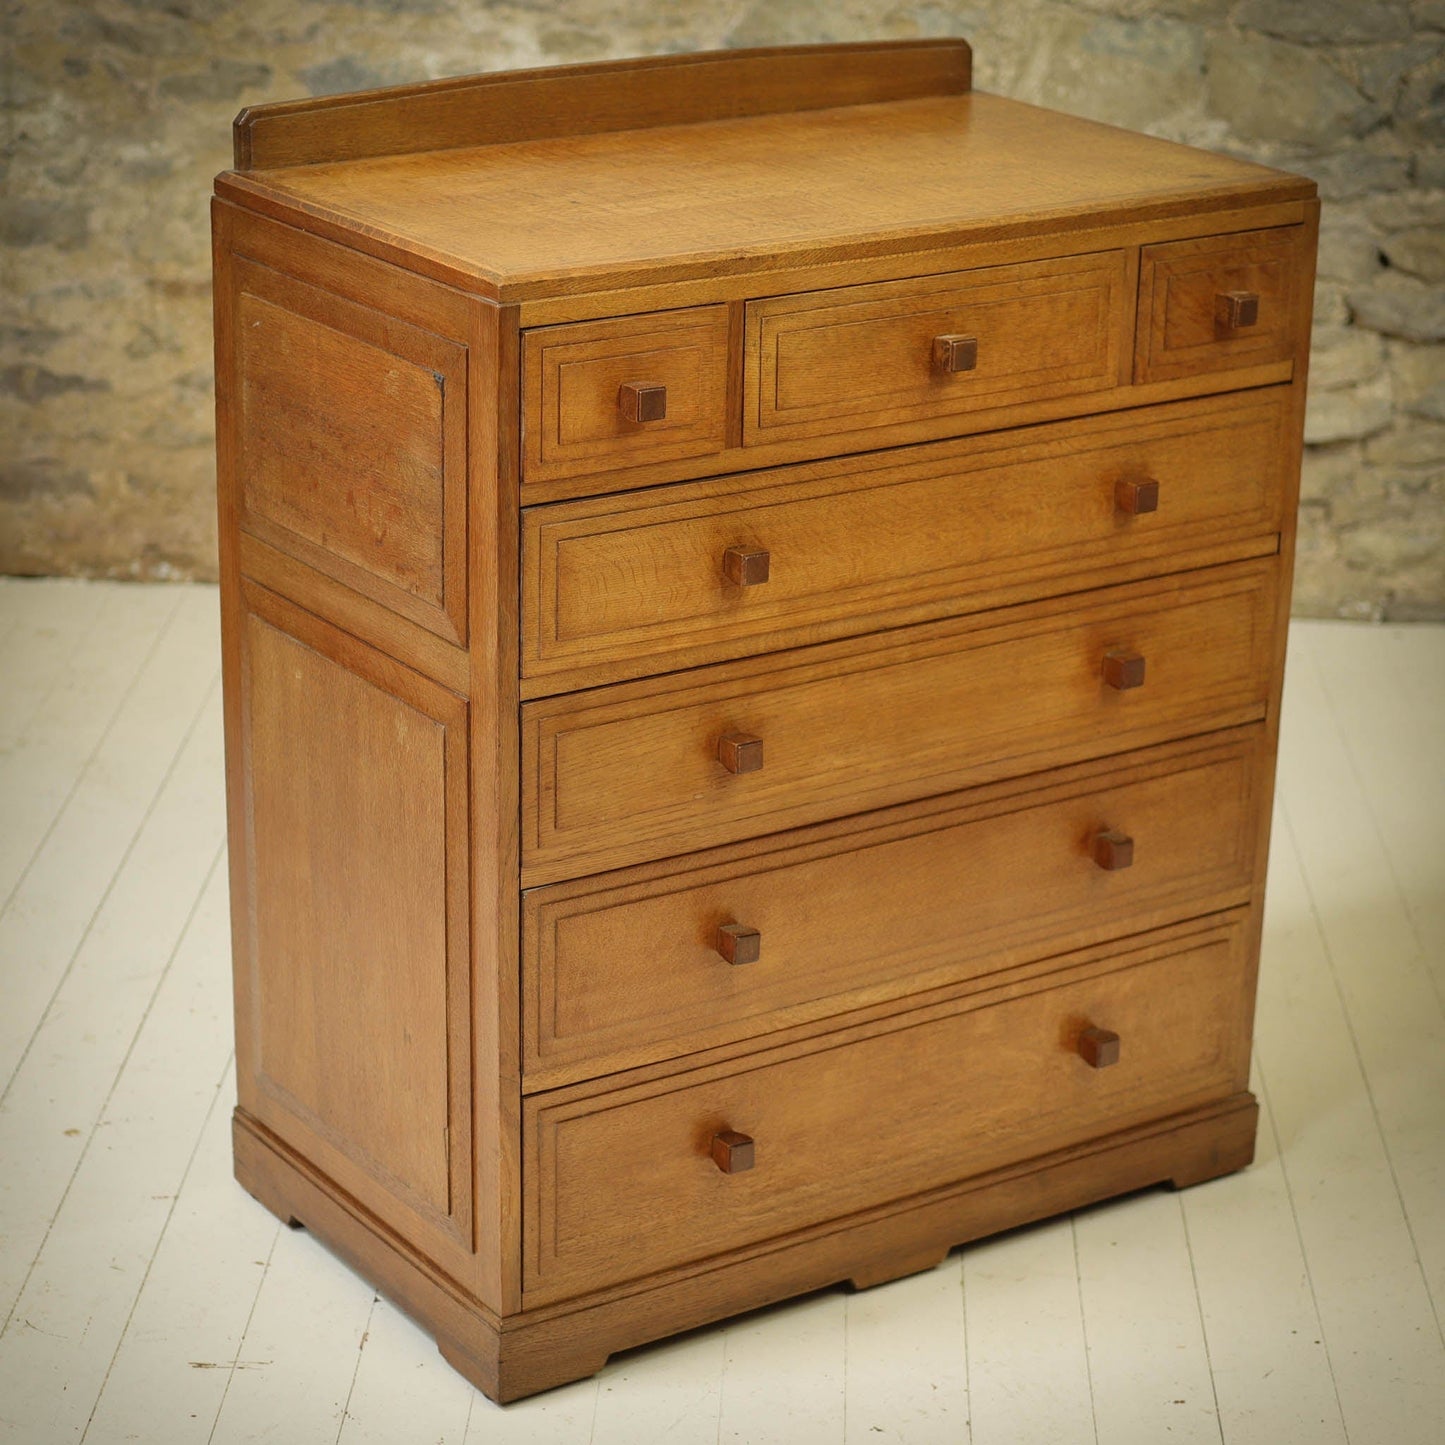 Brynmawr Furniture Co Arts & Crafts Cotswold School Oak Chest of Drawers c. 1930